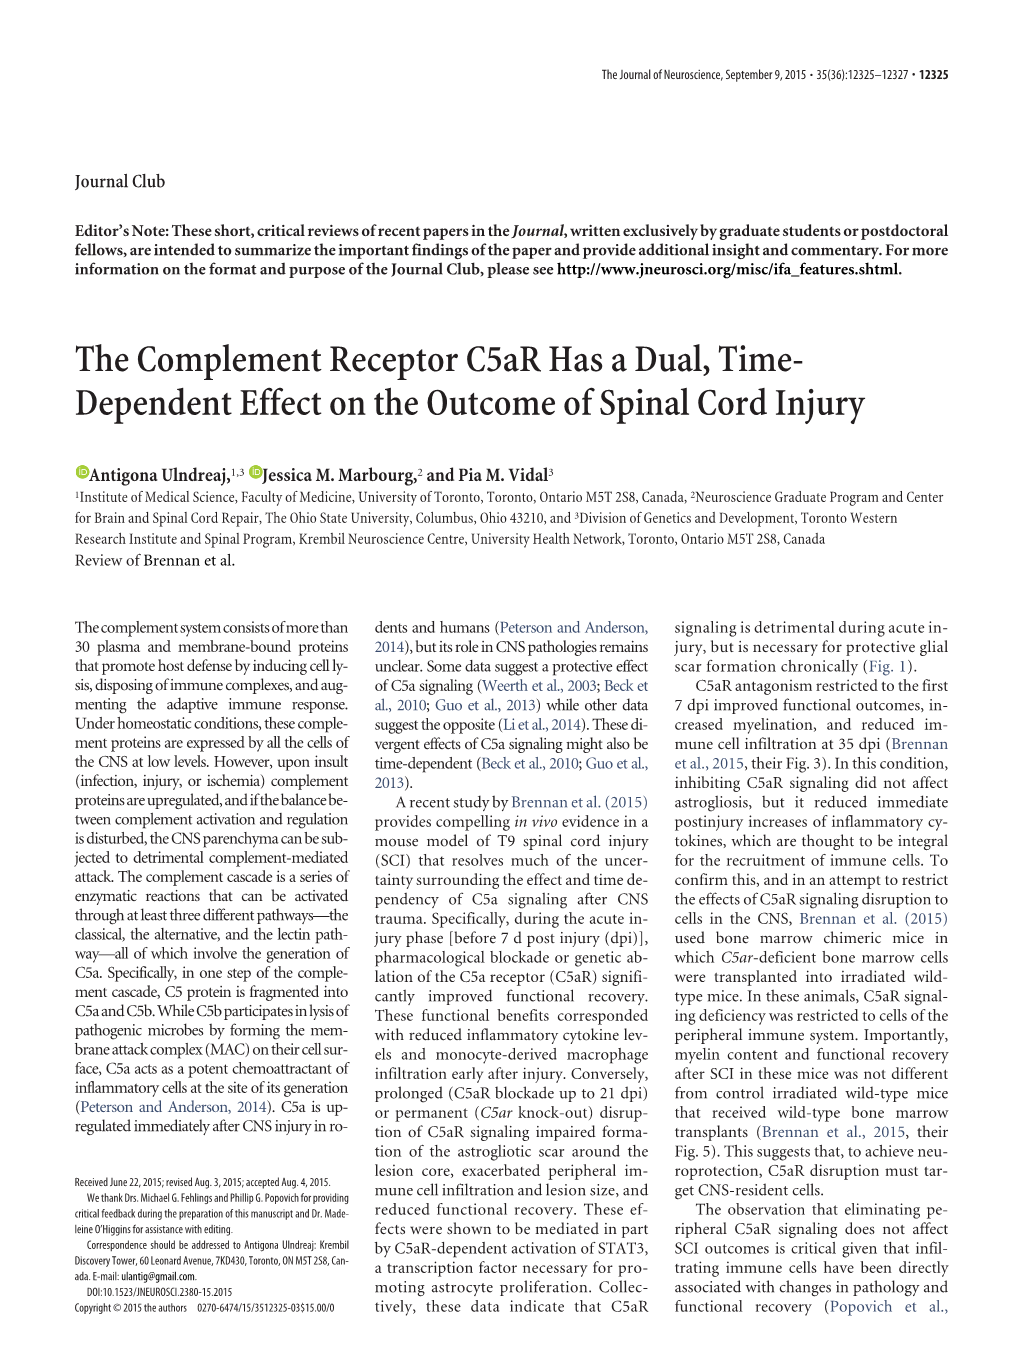 The Complement Receptor C5ar Has a Dual, Time- Dependent Effect on the Outcome of Spinal Cord Injury